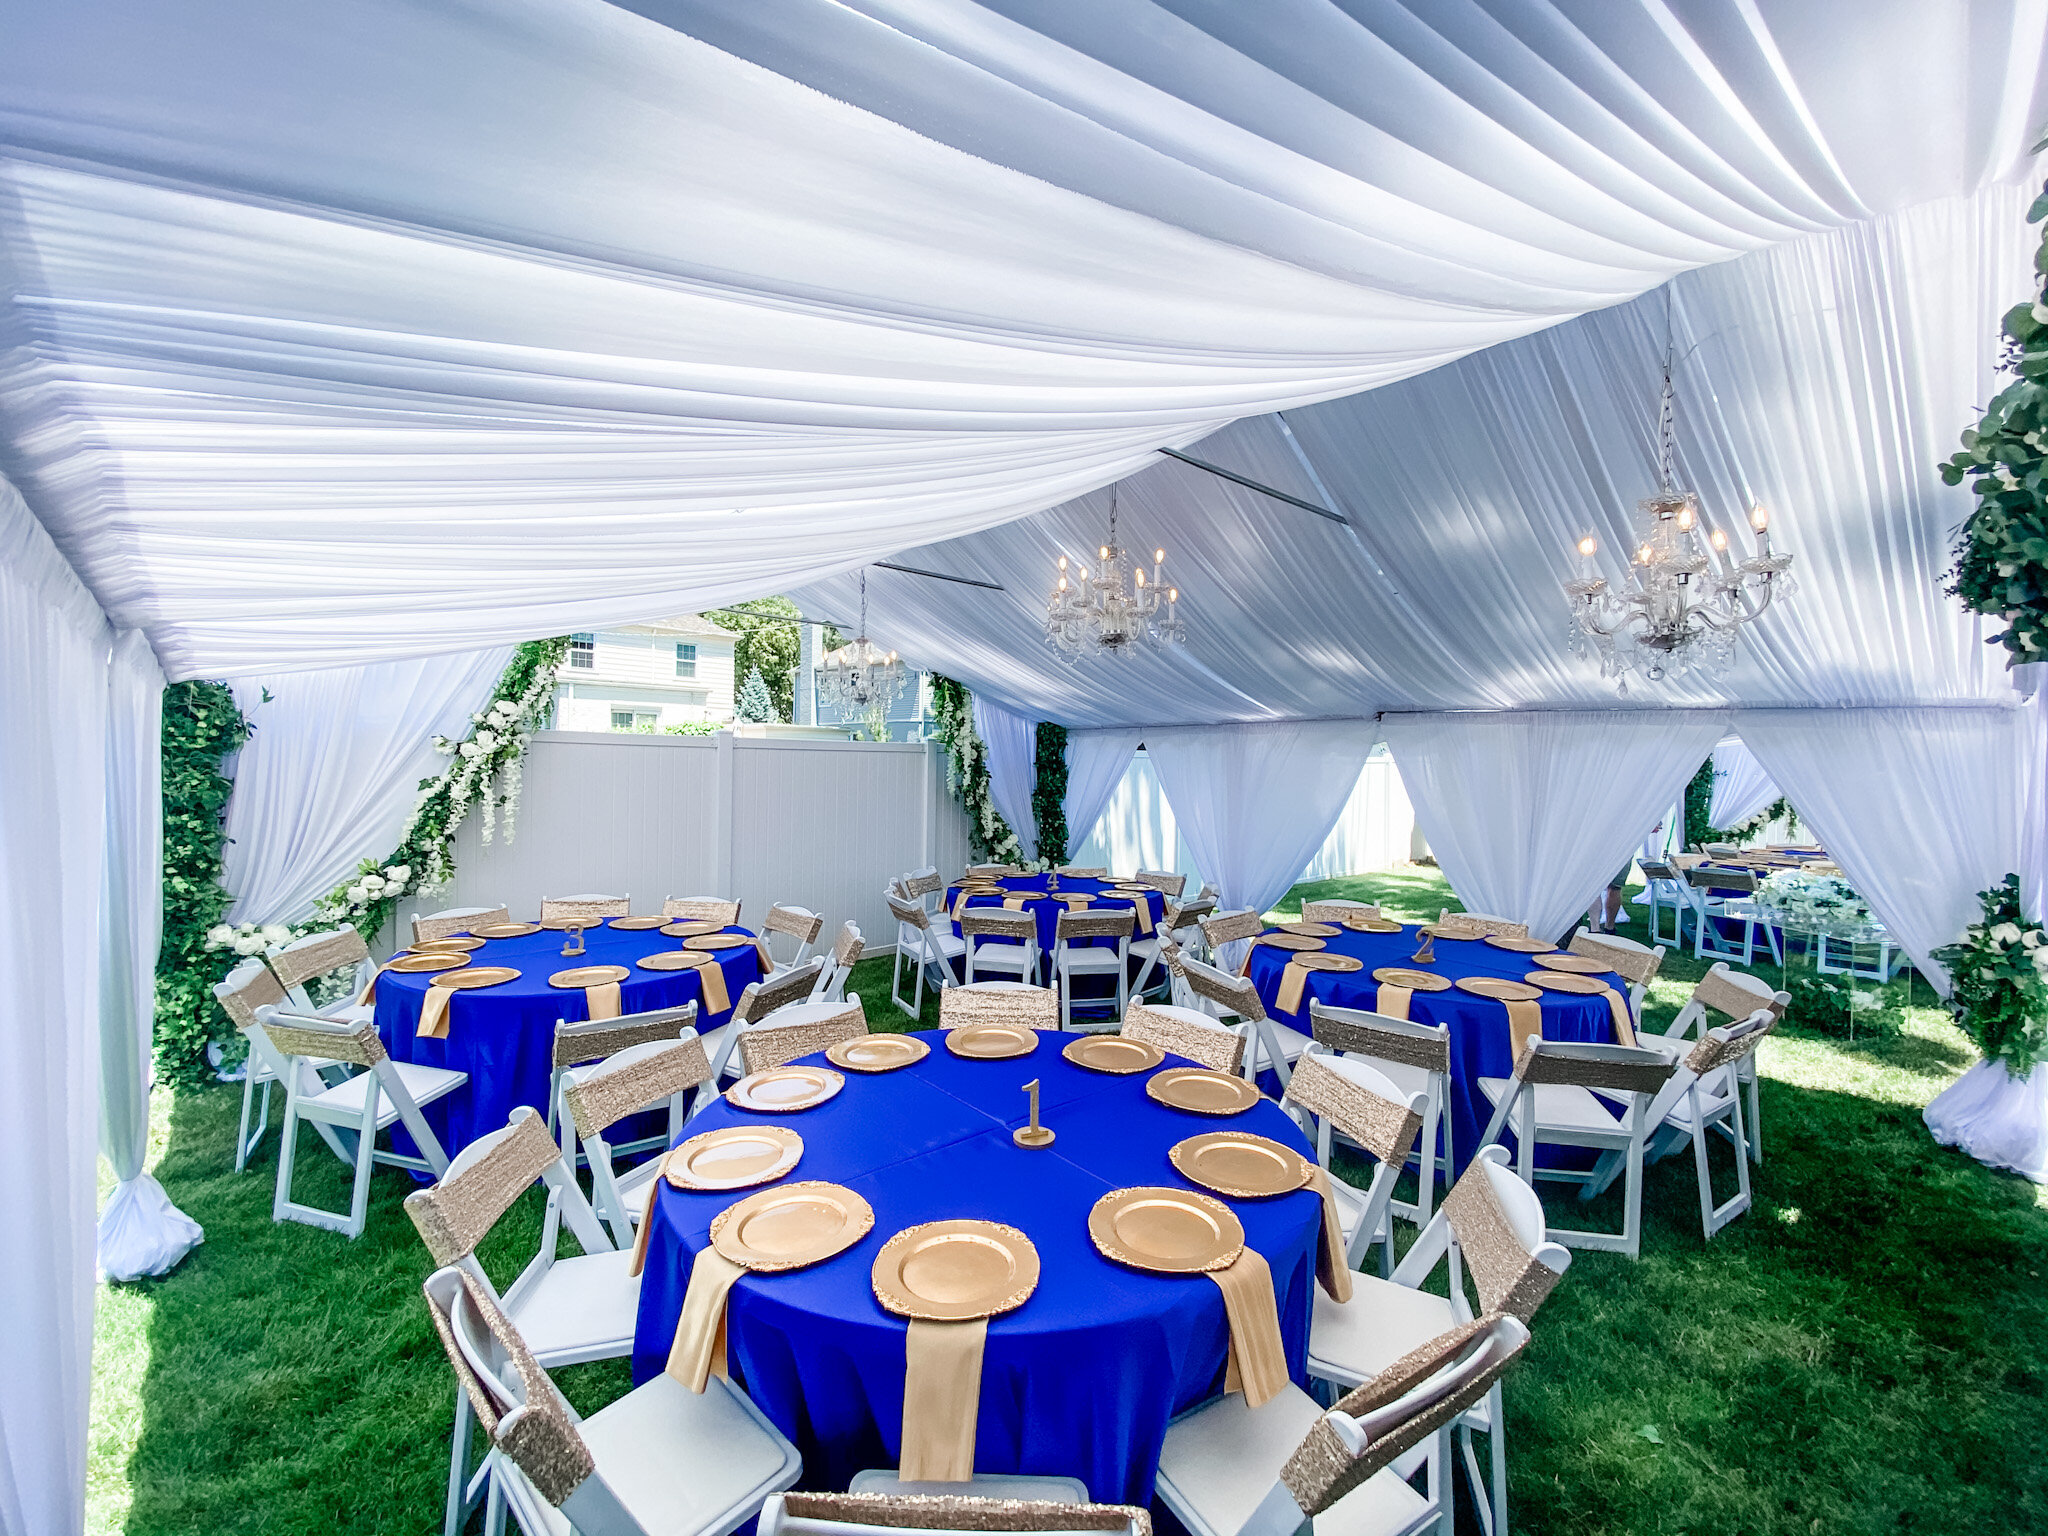 tent rental in Napervill eoutdoor party decoration backyard wedding micro wedding outdoor party rental naperville frame tents festival tent birthday party tent backyard wedding tent corpporate event tent   (14).JPG